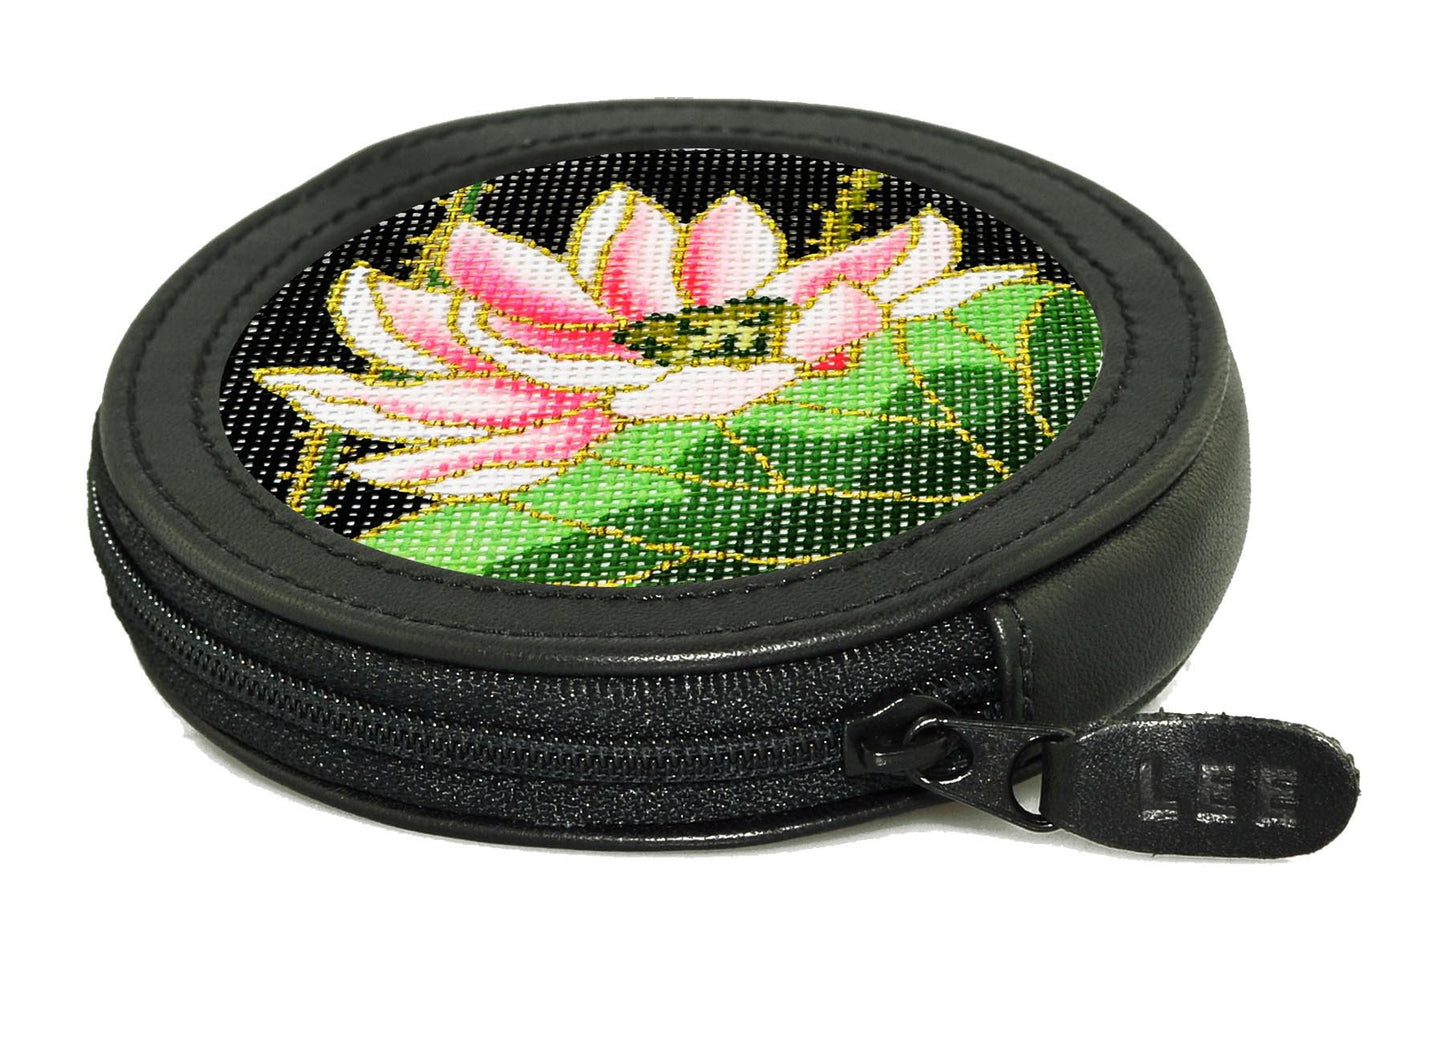 Accessory ~ Black Smooth Leather Zipper Change Purse  for 3" Round Canvas